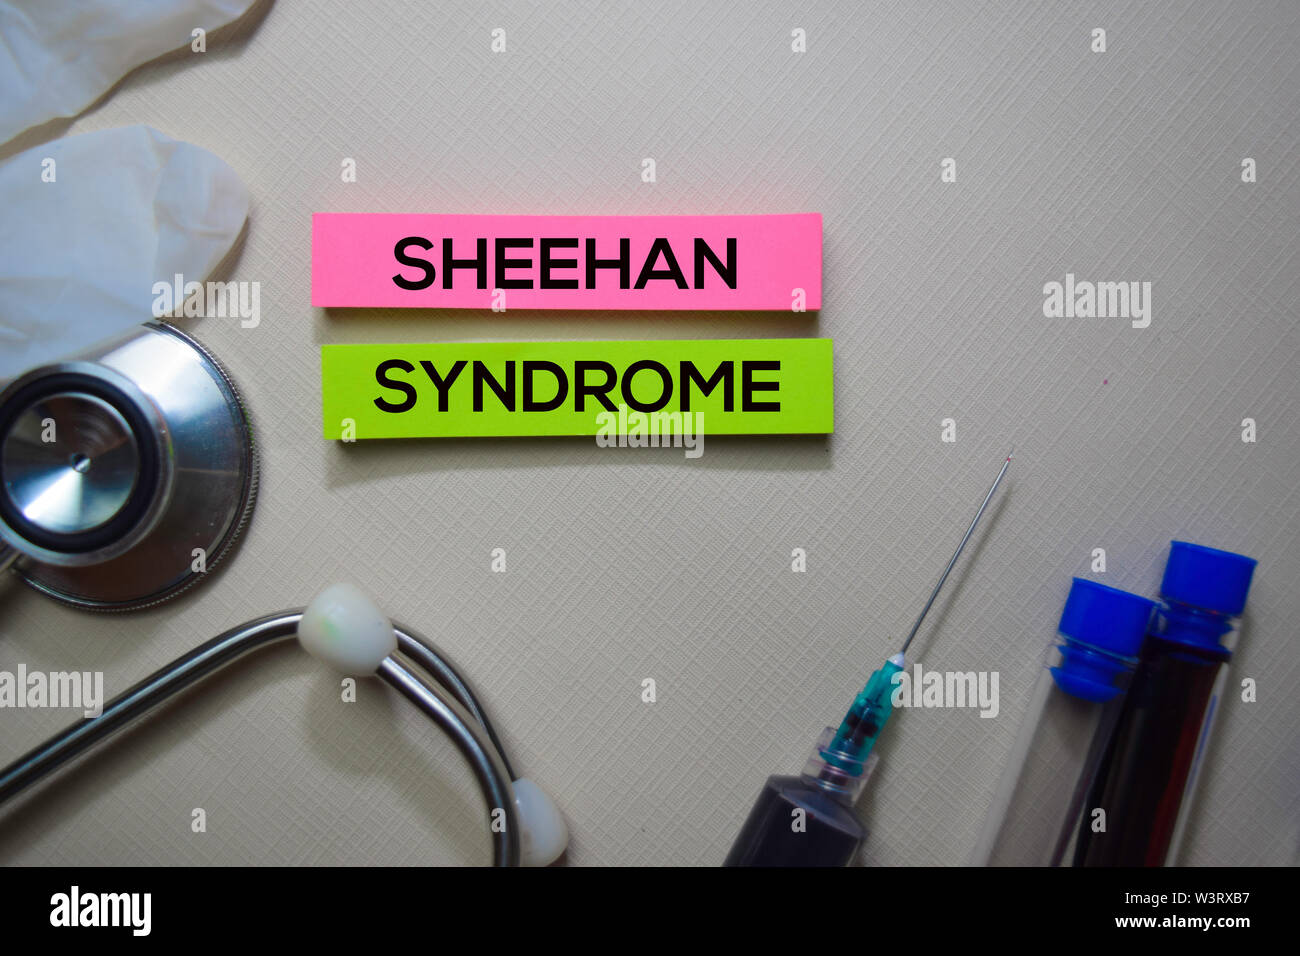 Sheehan Syndrome text on Sticky Notes. Top view isolated on office desk. Healthcare/Medical concept Stock Photo